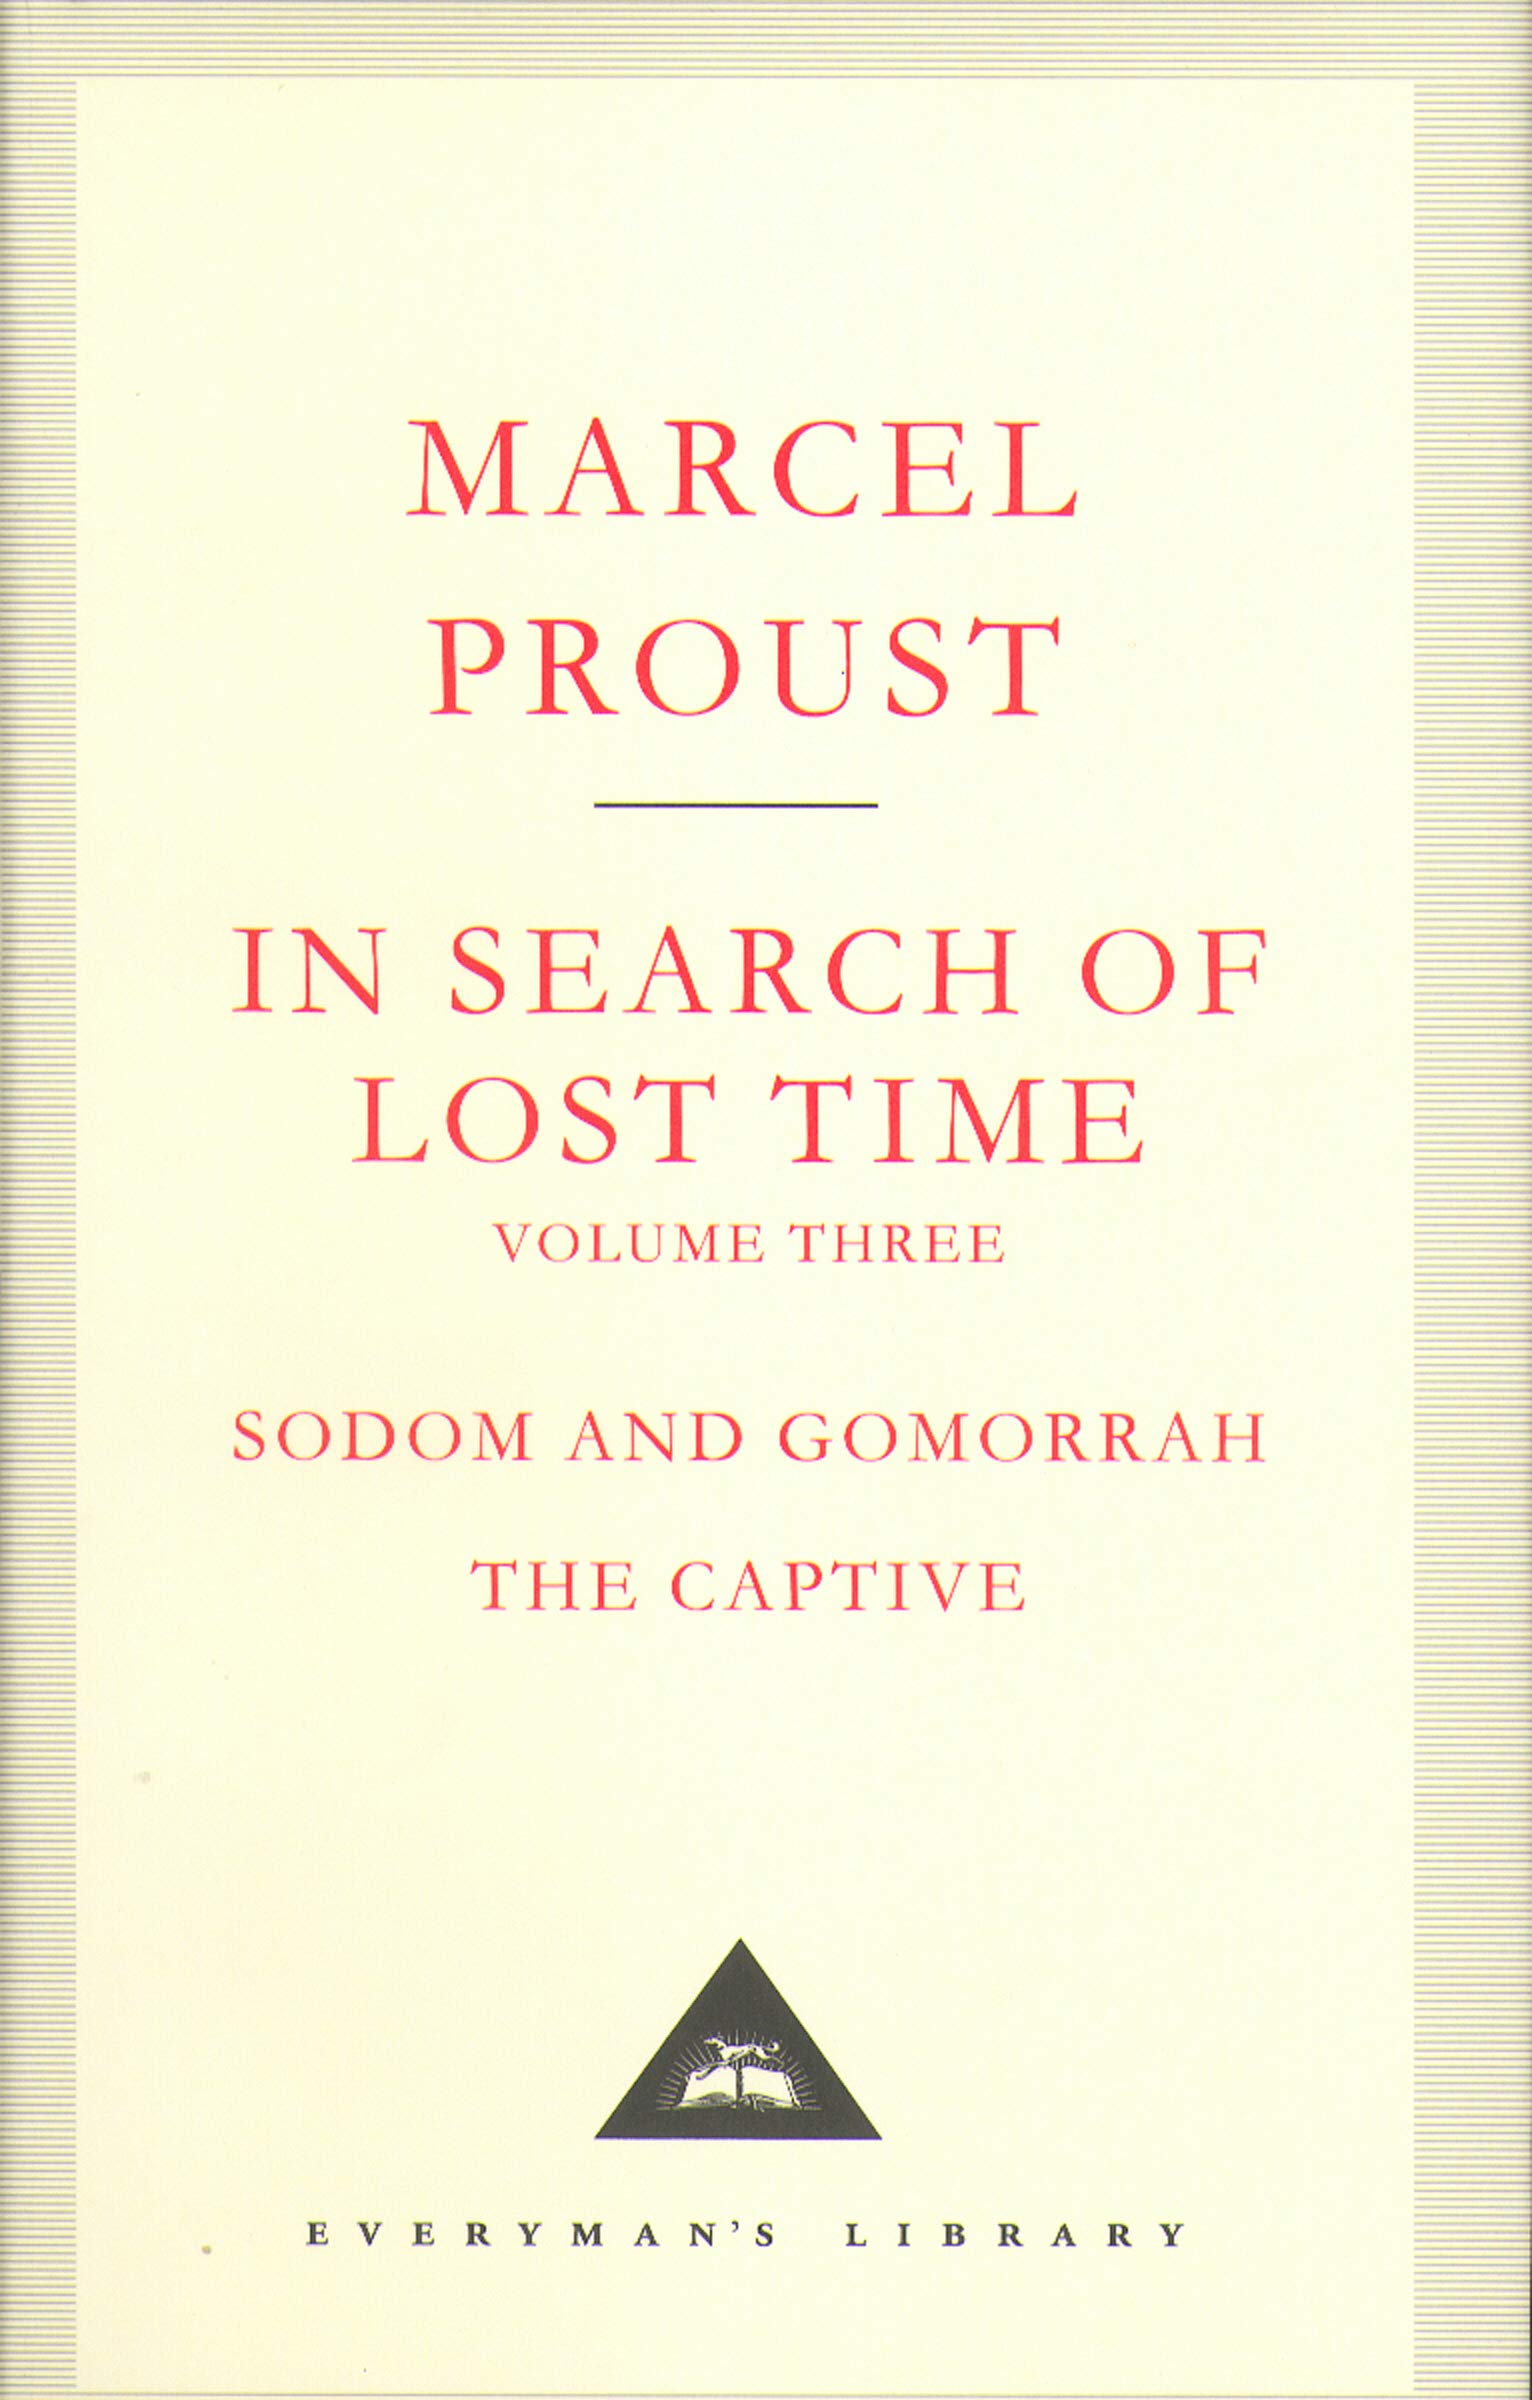 In Search of Lost Time. Sodom and Gomorrah. The Captive